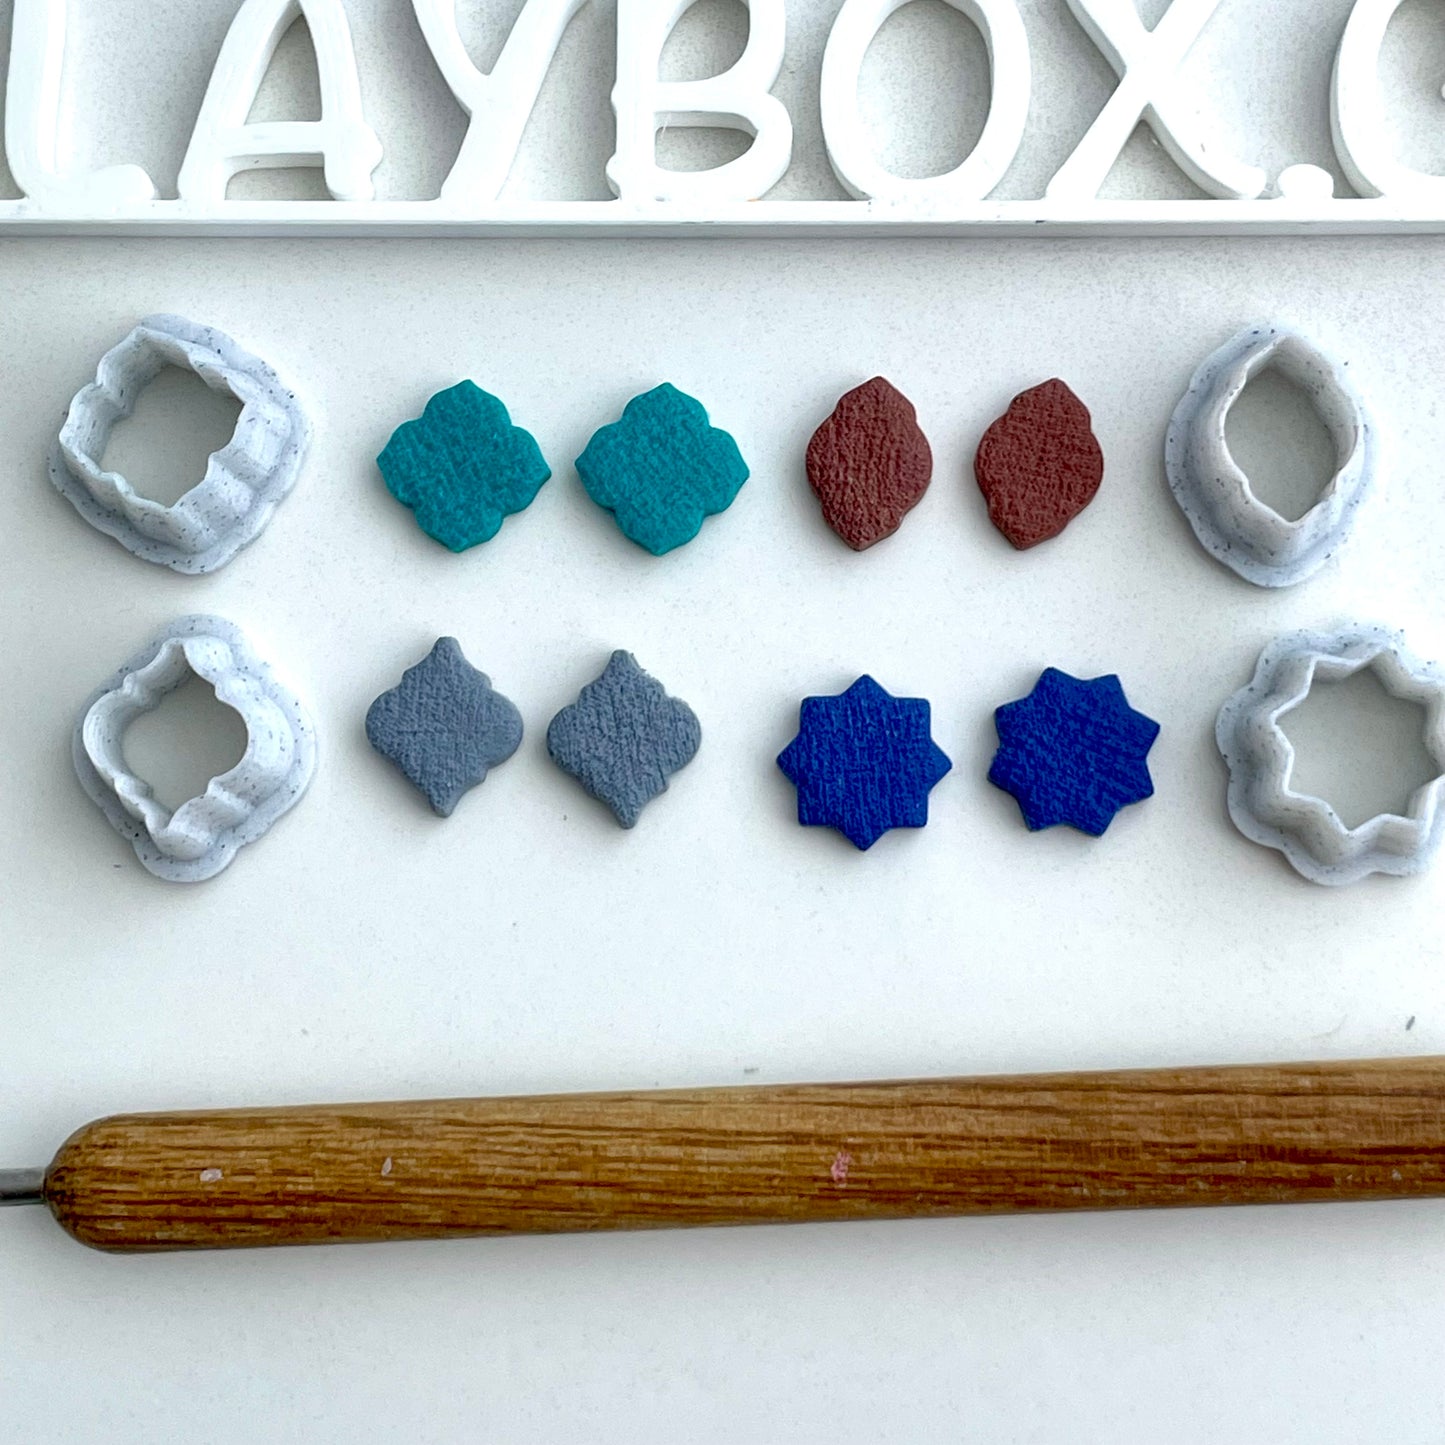 Moroccan shapes stud cutter set - made for polymer clay